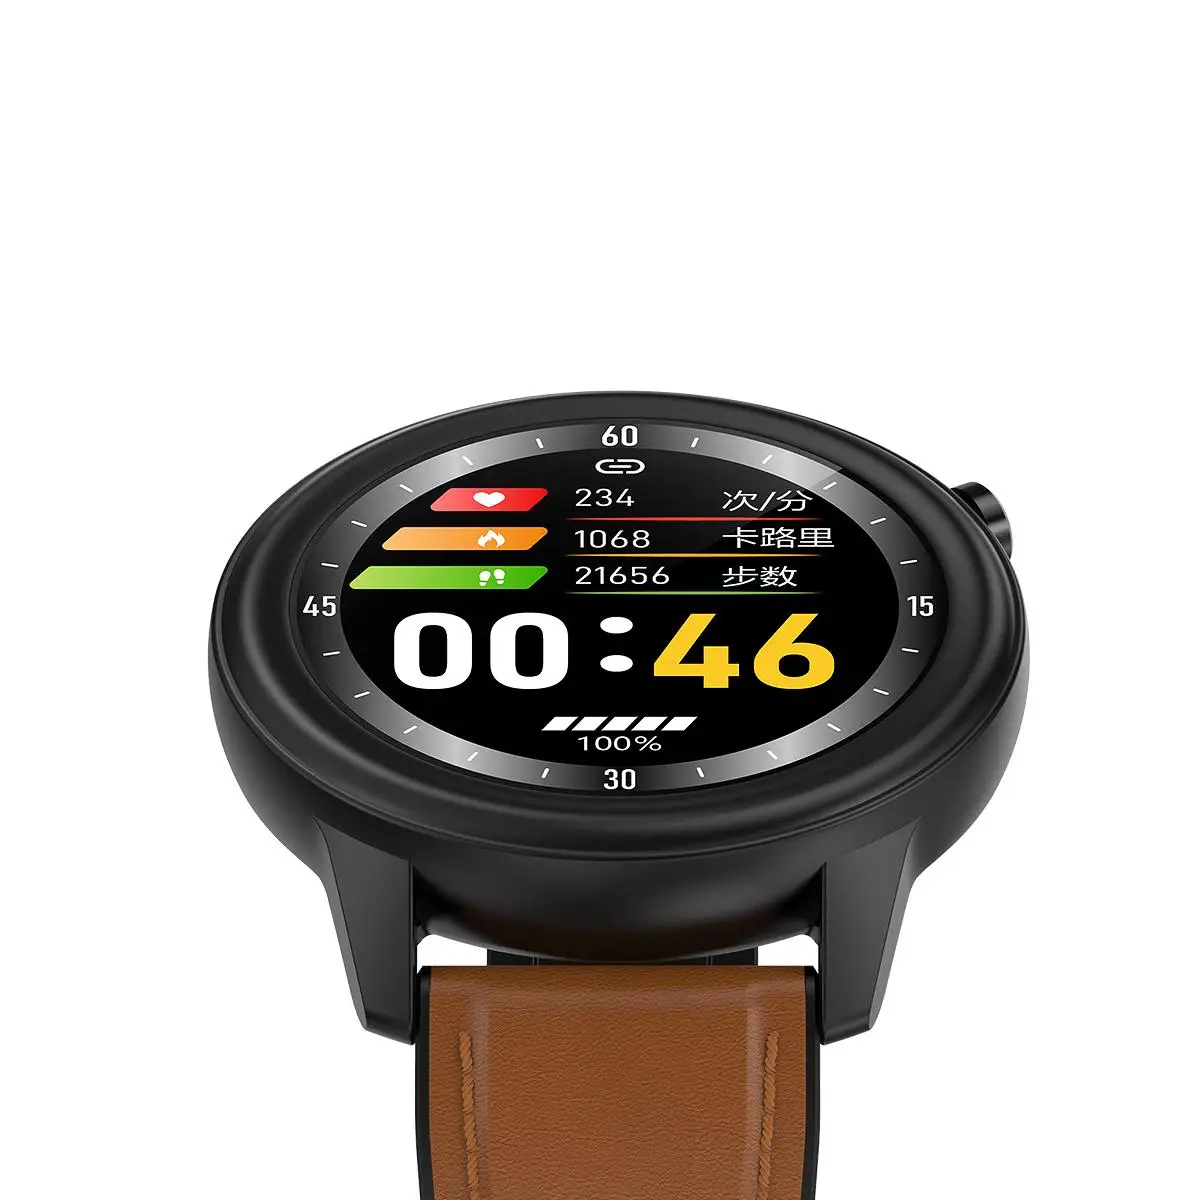 

Bakeey F81 Temperature Measure Heart Rate Blood Pressure Oxygen Monitor Weather Forecast IP68 Waterproof Smart Watch Android IOS